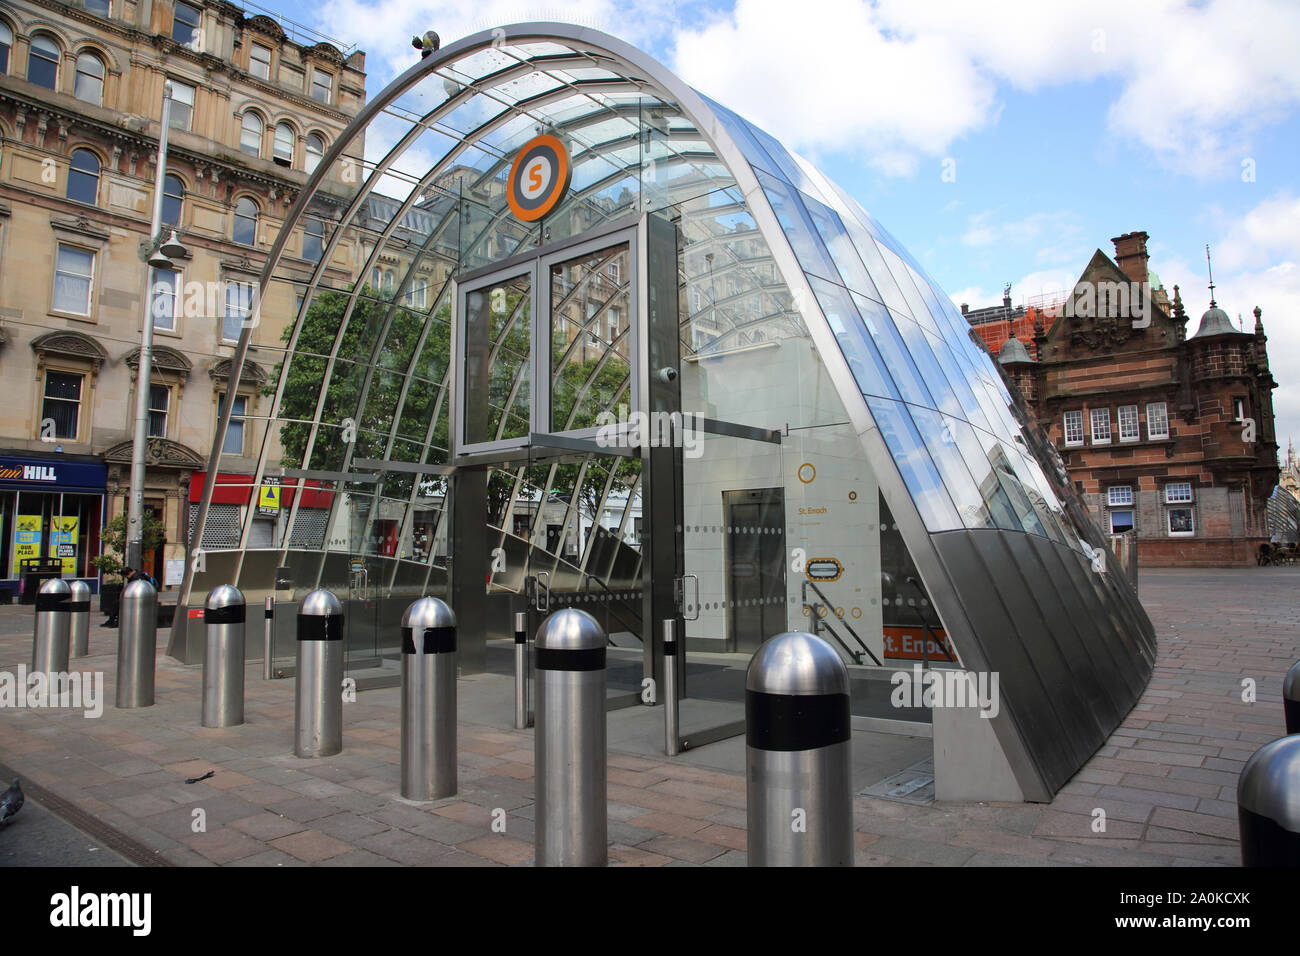 Glasgow Scotland St Enoch Subway Station Entrance with Former Victorian Entrance behind Stock Photo